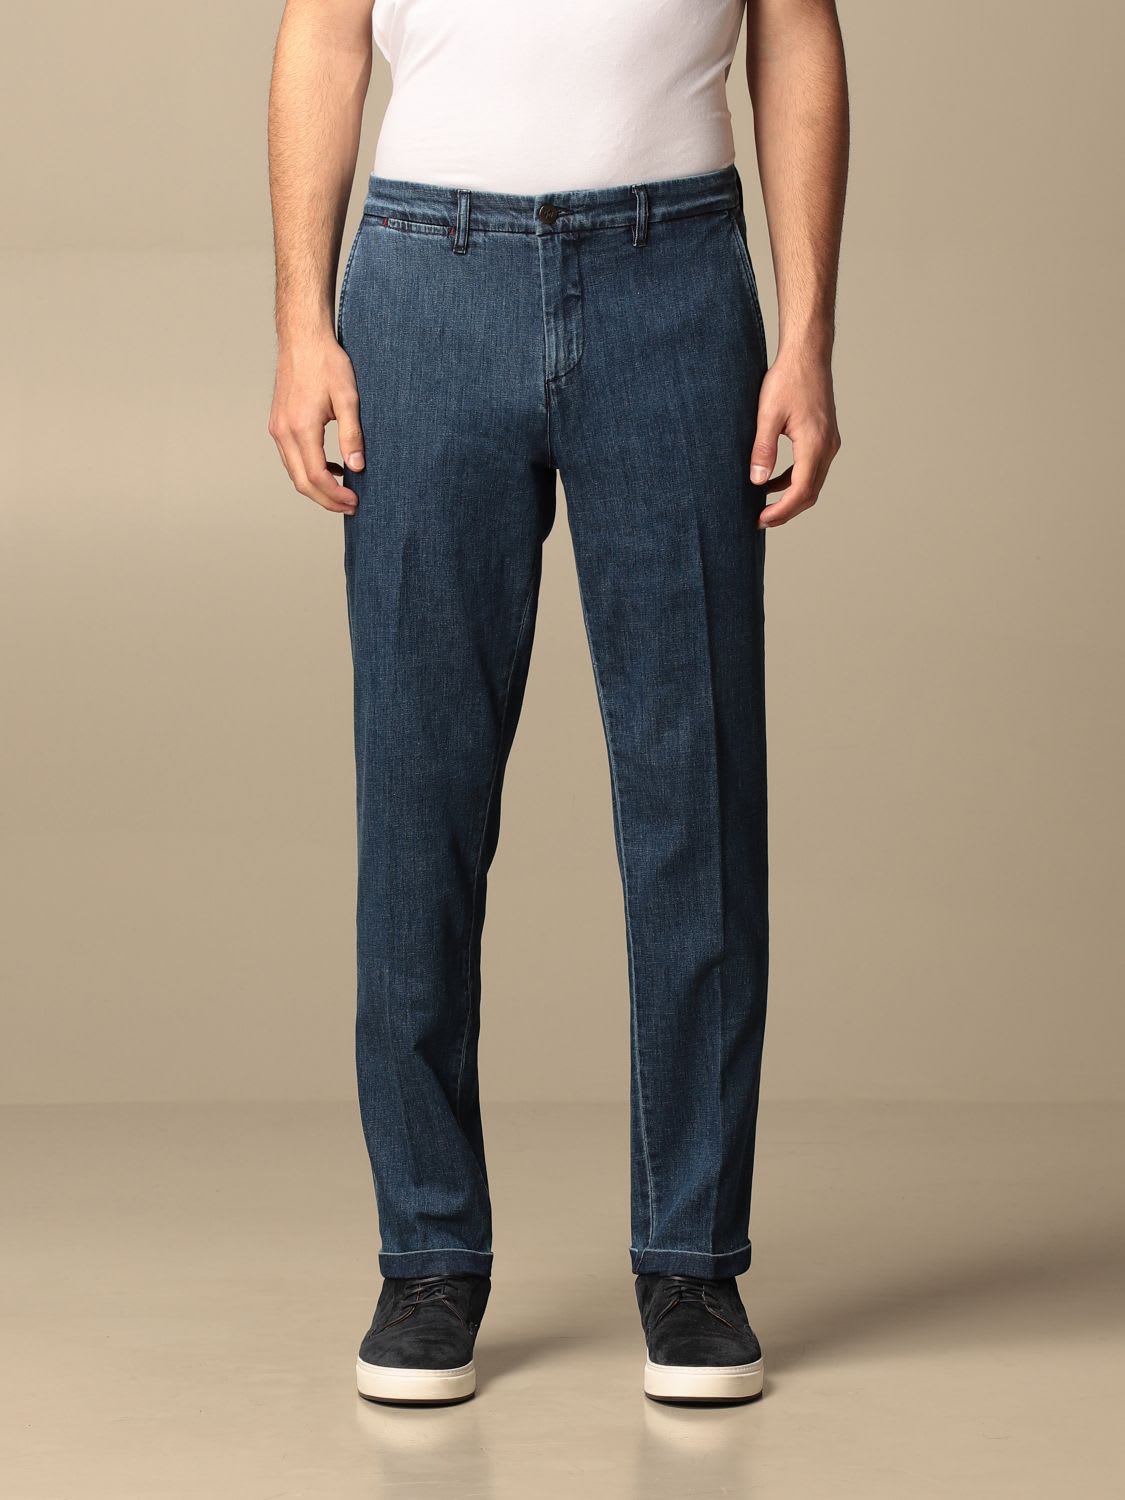 Fay Jeans Fay Jeans In Light Stretch Denim